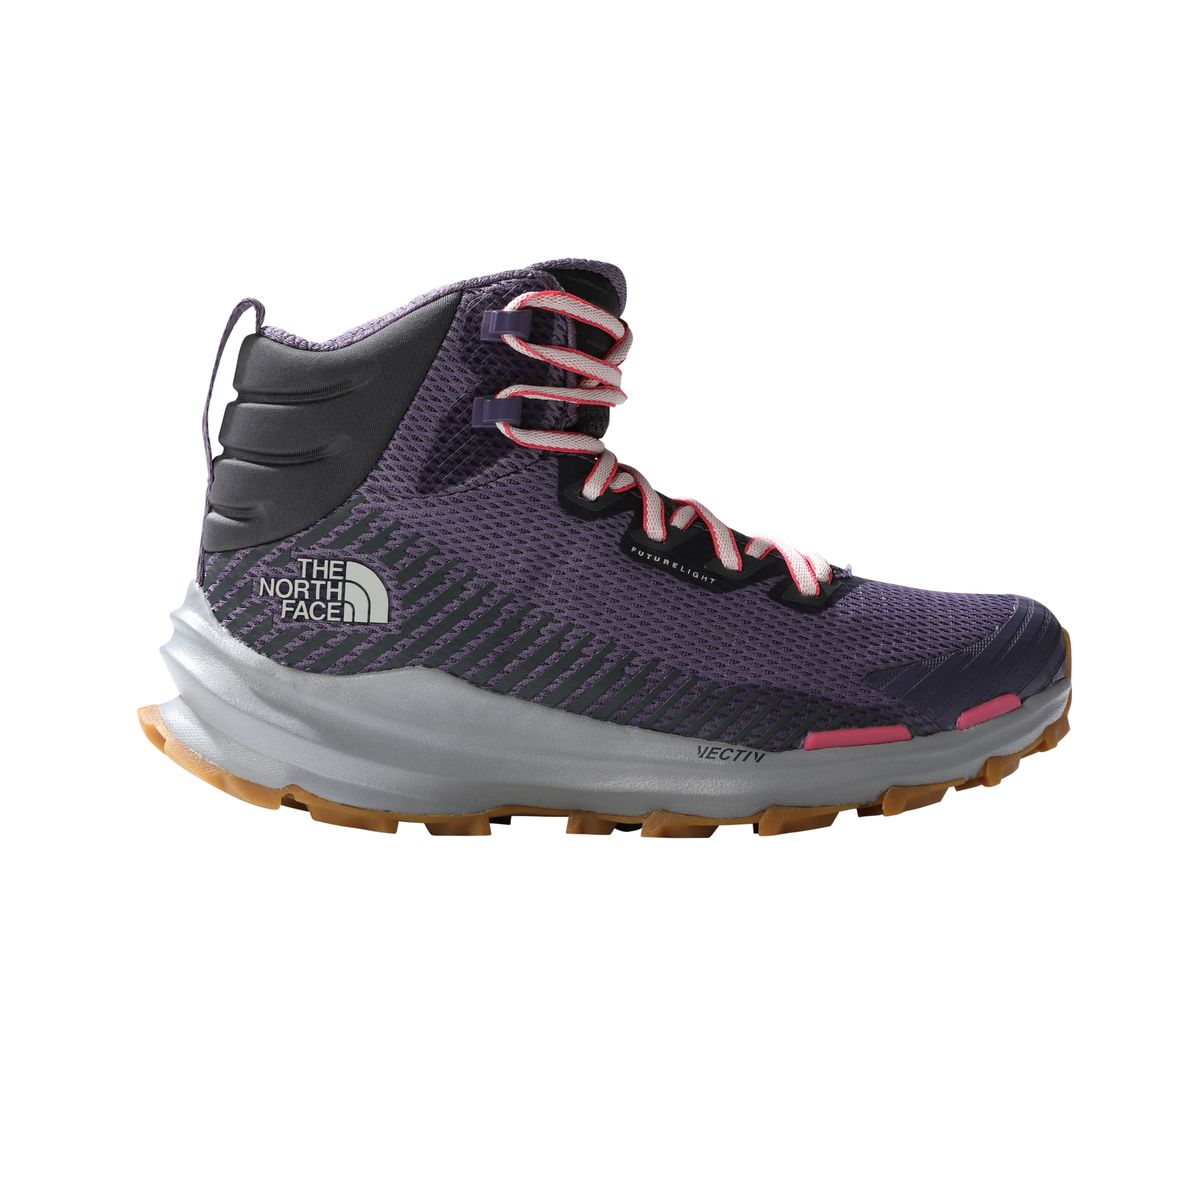 The North Face Women's Vectiv Fastpack Futurelight Hiking Boots ...